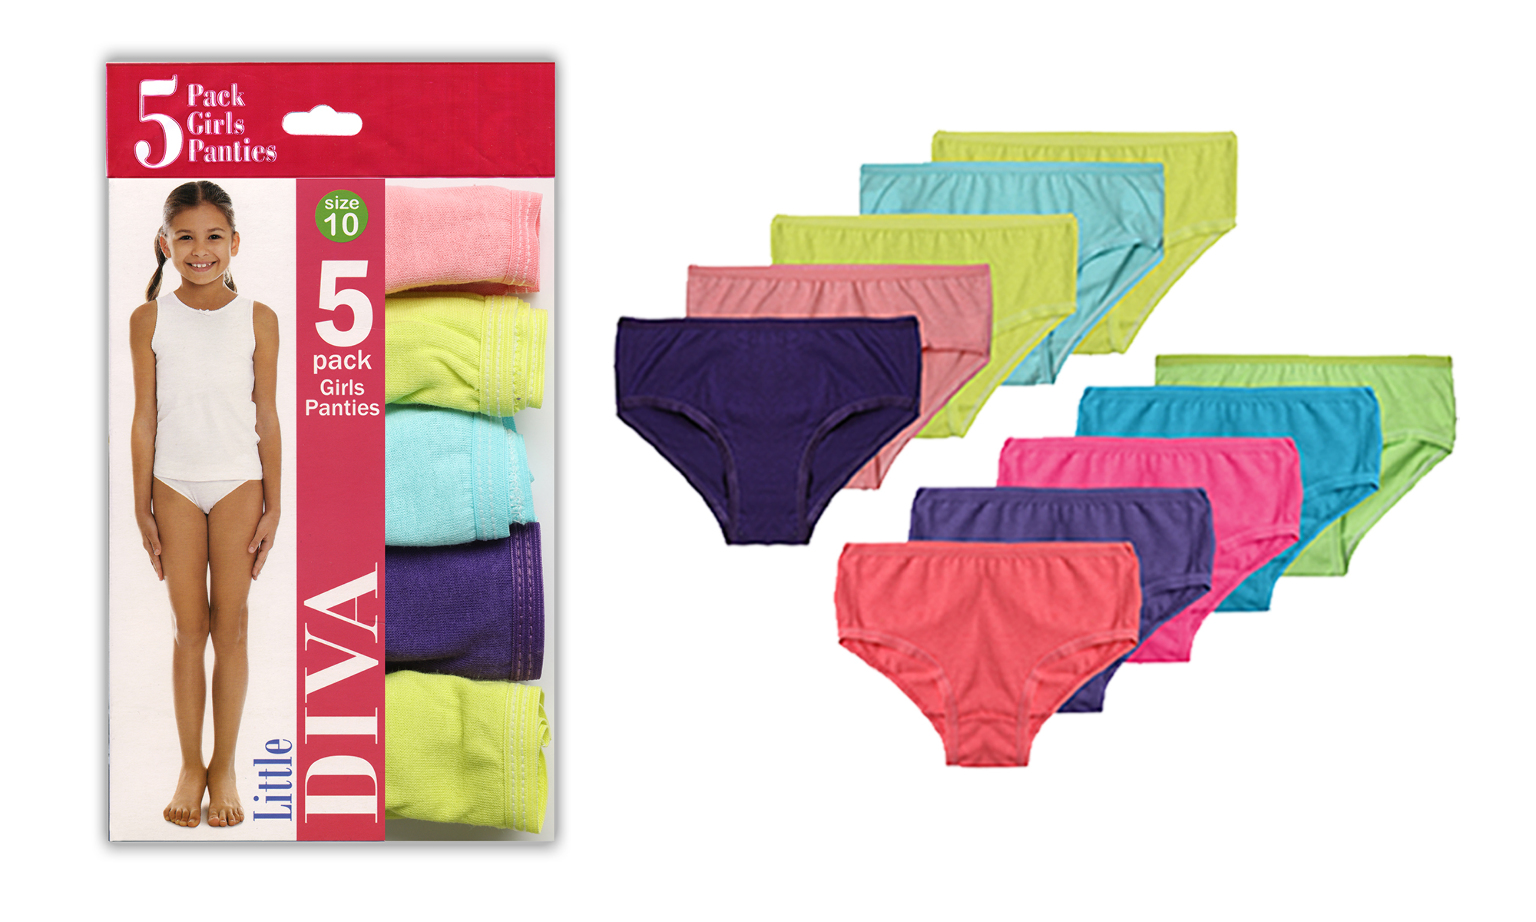 Girl's Panties - Assorted Solids, Size 12, 5 Pack